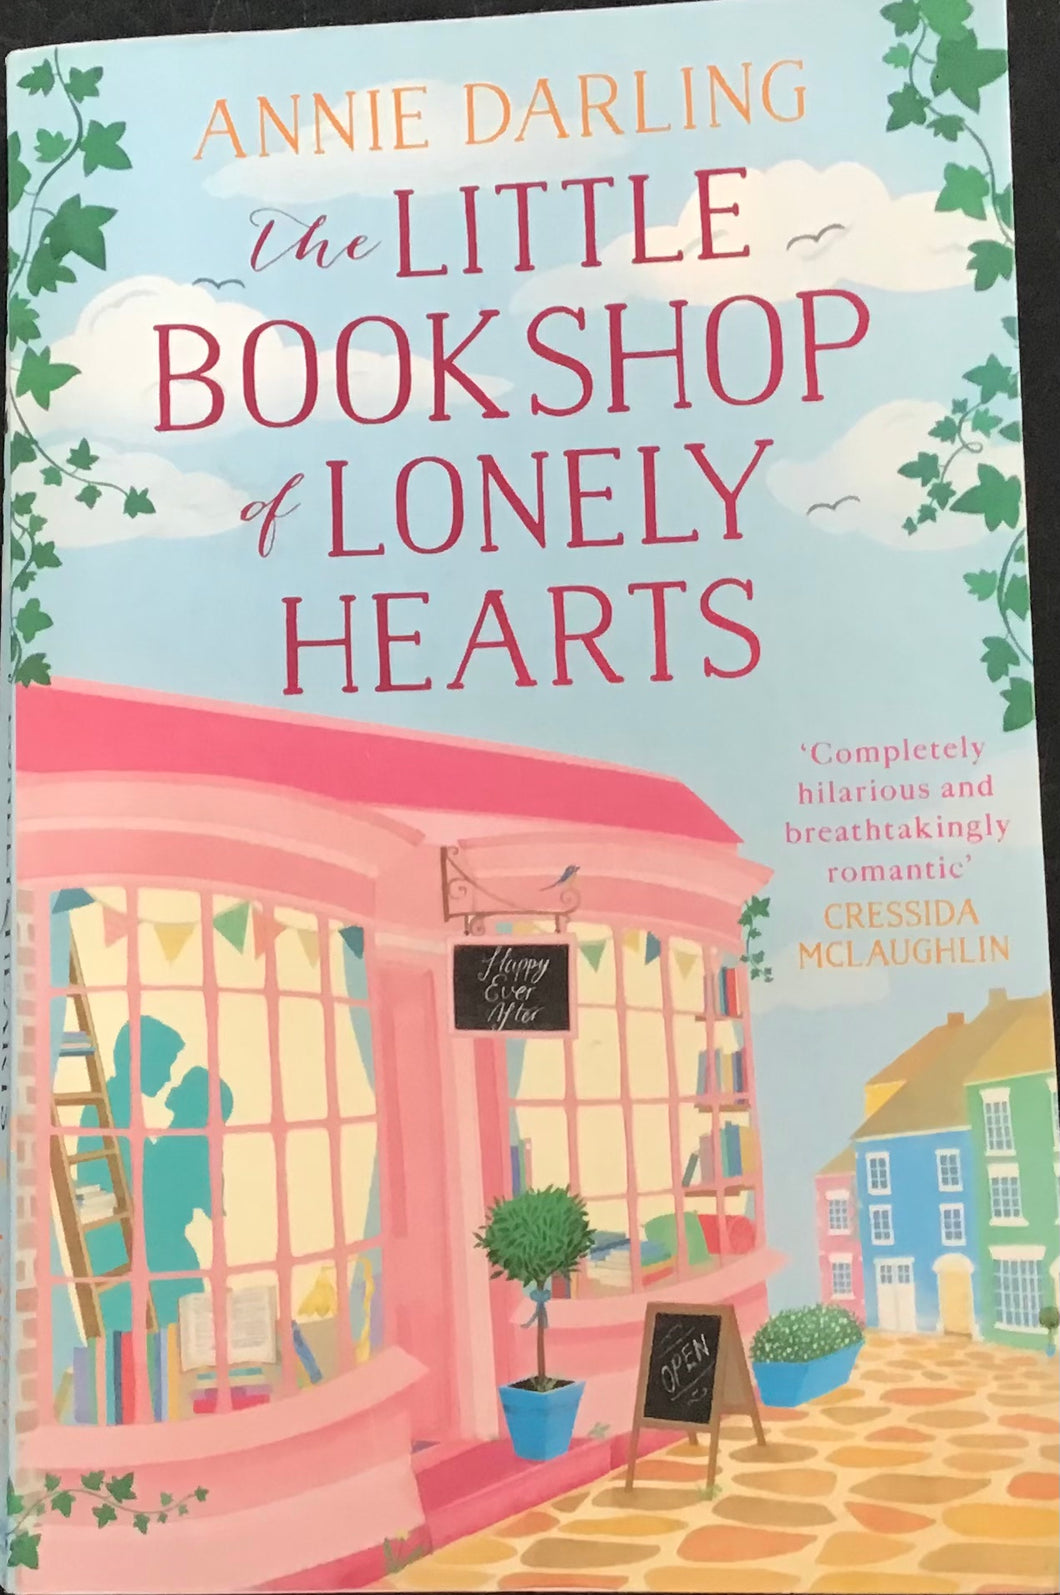 The Little Bookshop of Lonely Hearts, Annie Darling